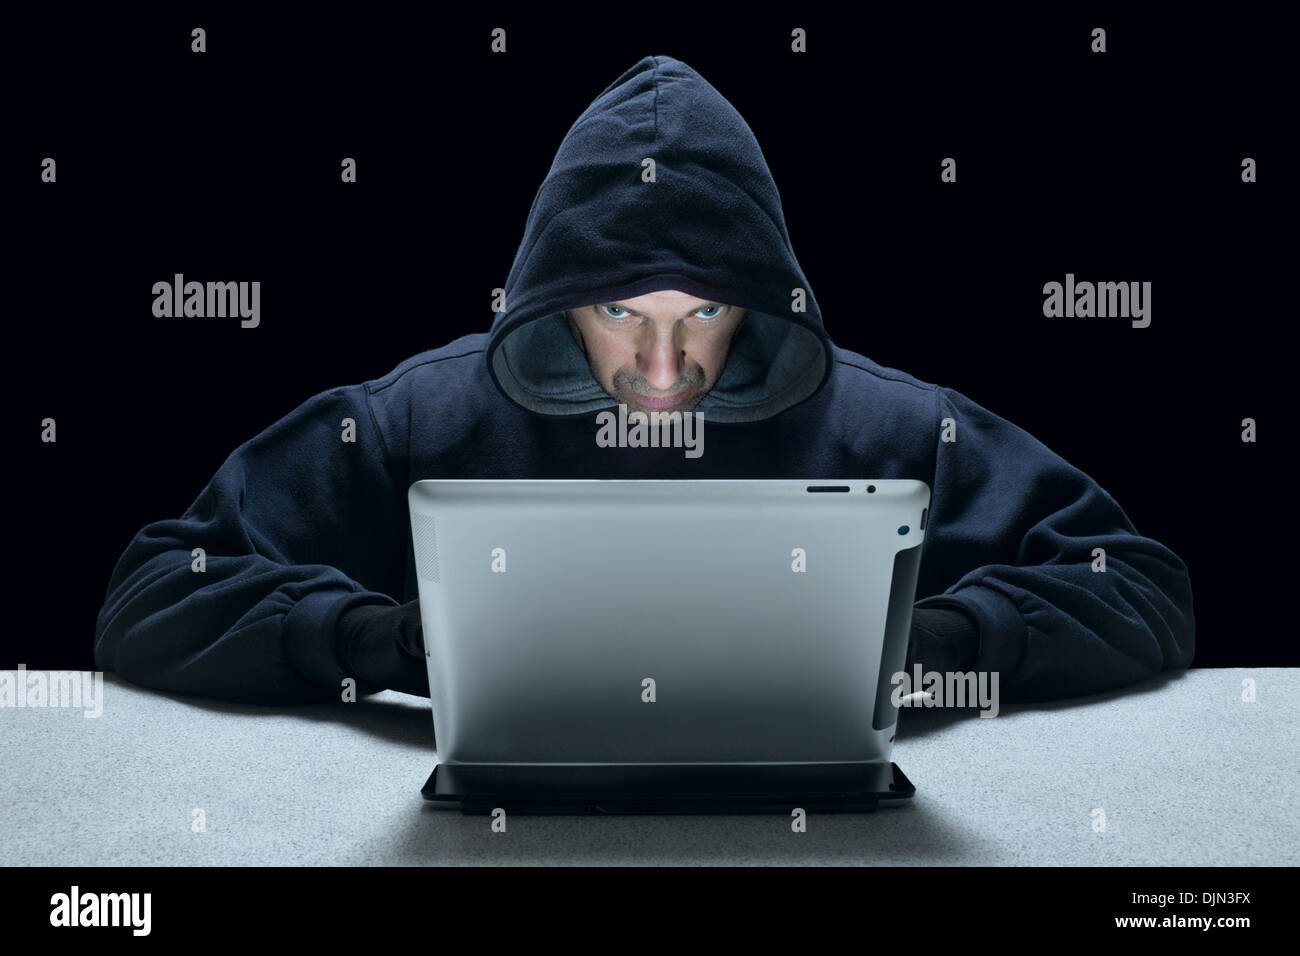 A hooded man representing a cyber criminal, using a tablet computer. Stock Photo